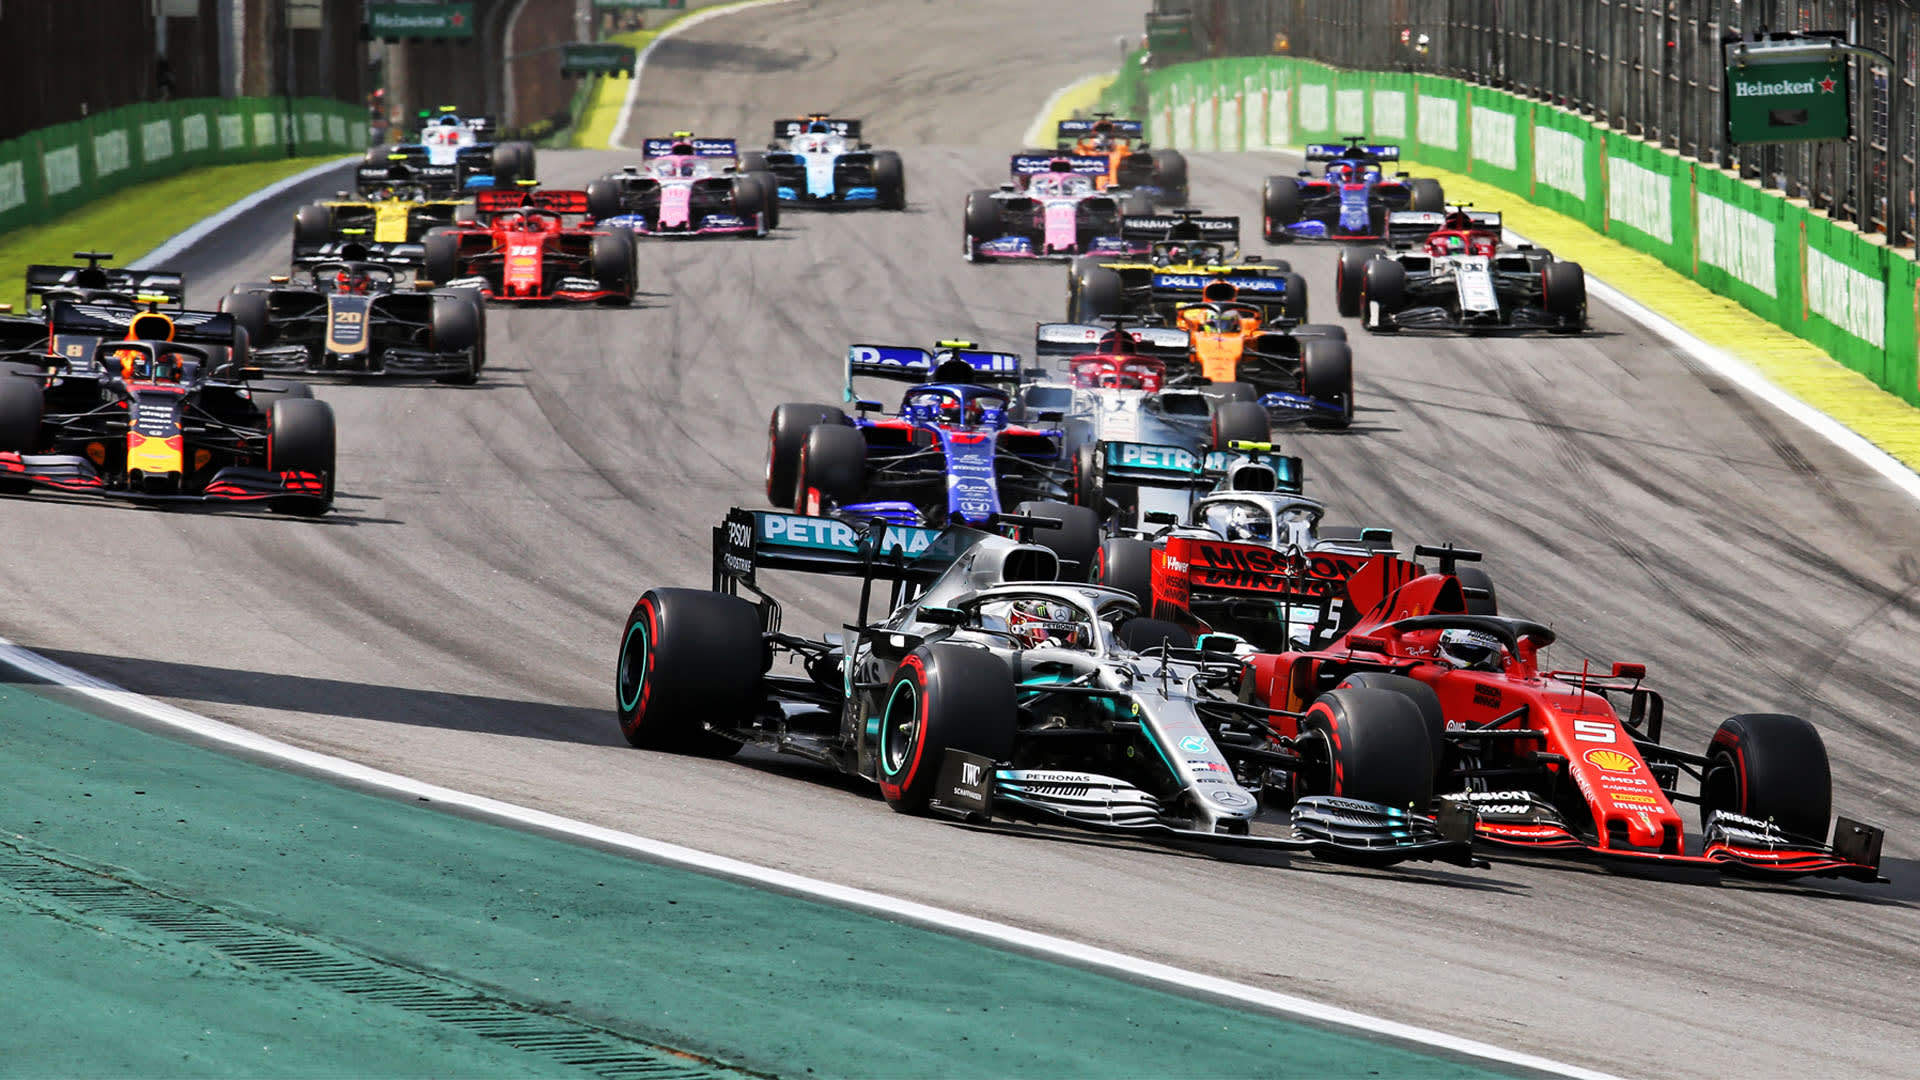 F1: Deep Dive Into The Brazilian Grand Prix's Heartbreaking History - F1  Briefings: Formula 1 News, Rumors, Standings and More